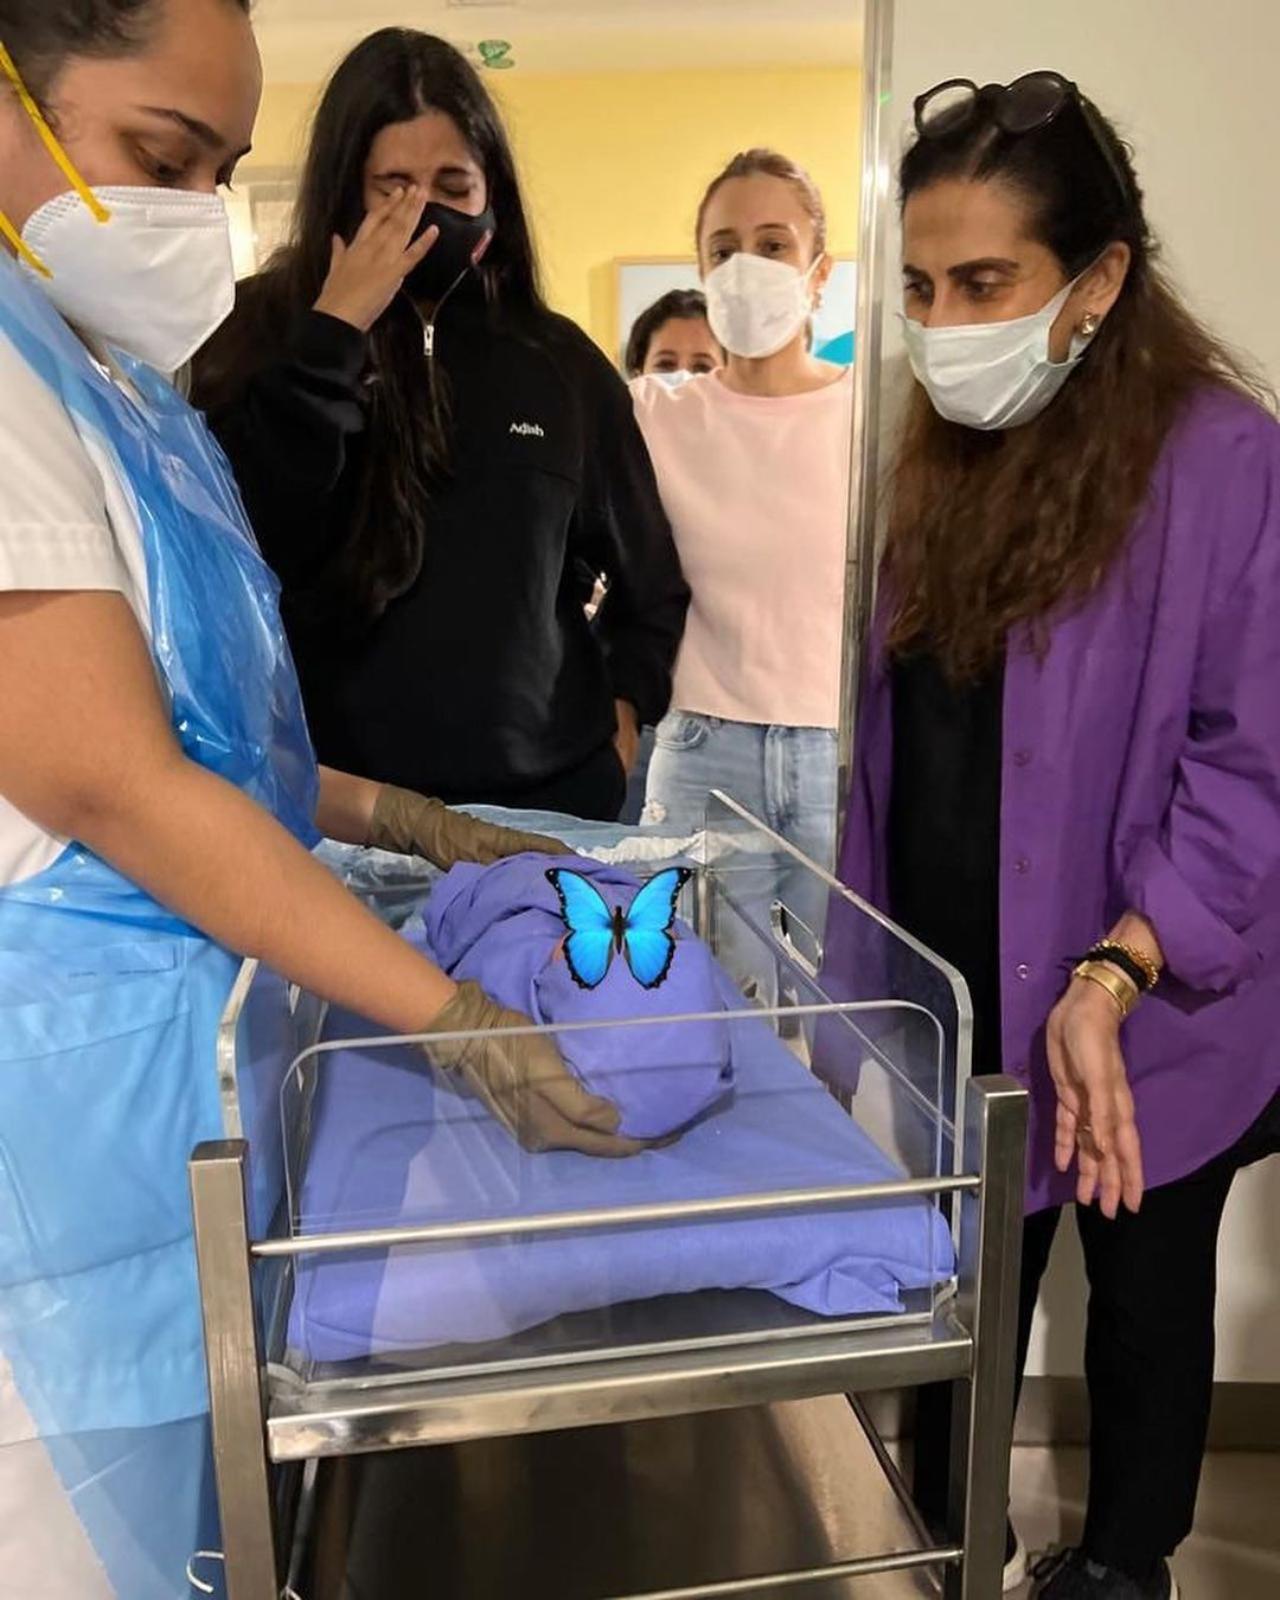 Later, Sonam's sister Rhea Kapoor has shared pictures of her getting emotional on seeing her ne[phew for the first time at the hospital. Shairng the pictures of her looking at the baby sleeping in the cradle, Rhea wrote, “Rhea masi is not ok. The cuteness is too much. The moment is unreal. I love you @sonamkapoor the bravest mommy and @anandahuja the most loving dad. Special mention new nani @kapoor.sunita #mynephew #everydayphenomenal.